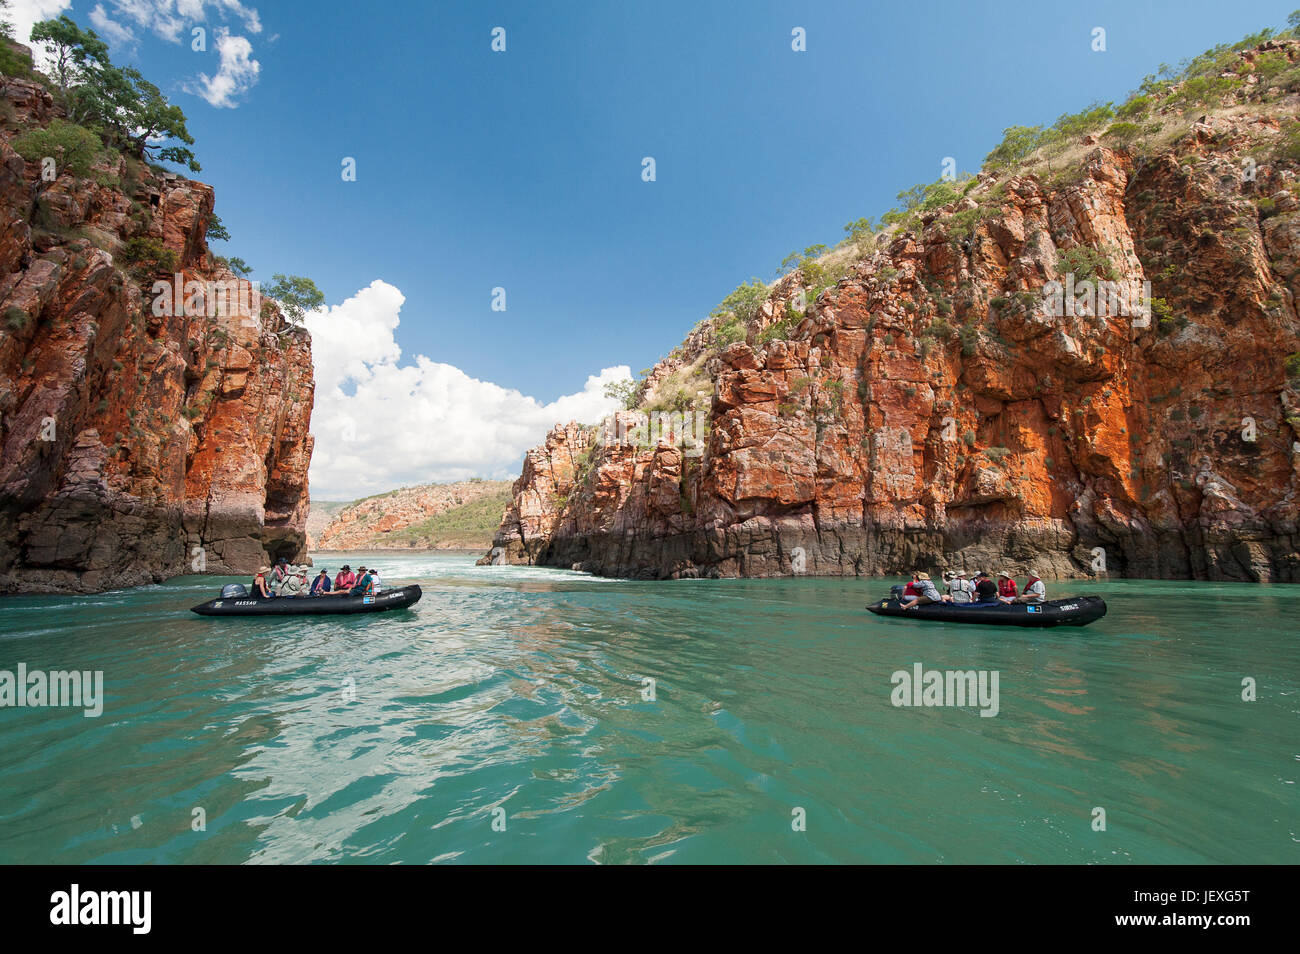 Tourists on zodiacs explore the extreme tidal fluctuations at Horizontal Waterfalls in Talbot Bay, Western Australia. Stock Photo